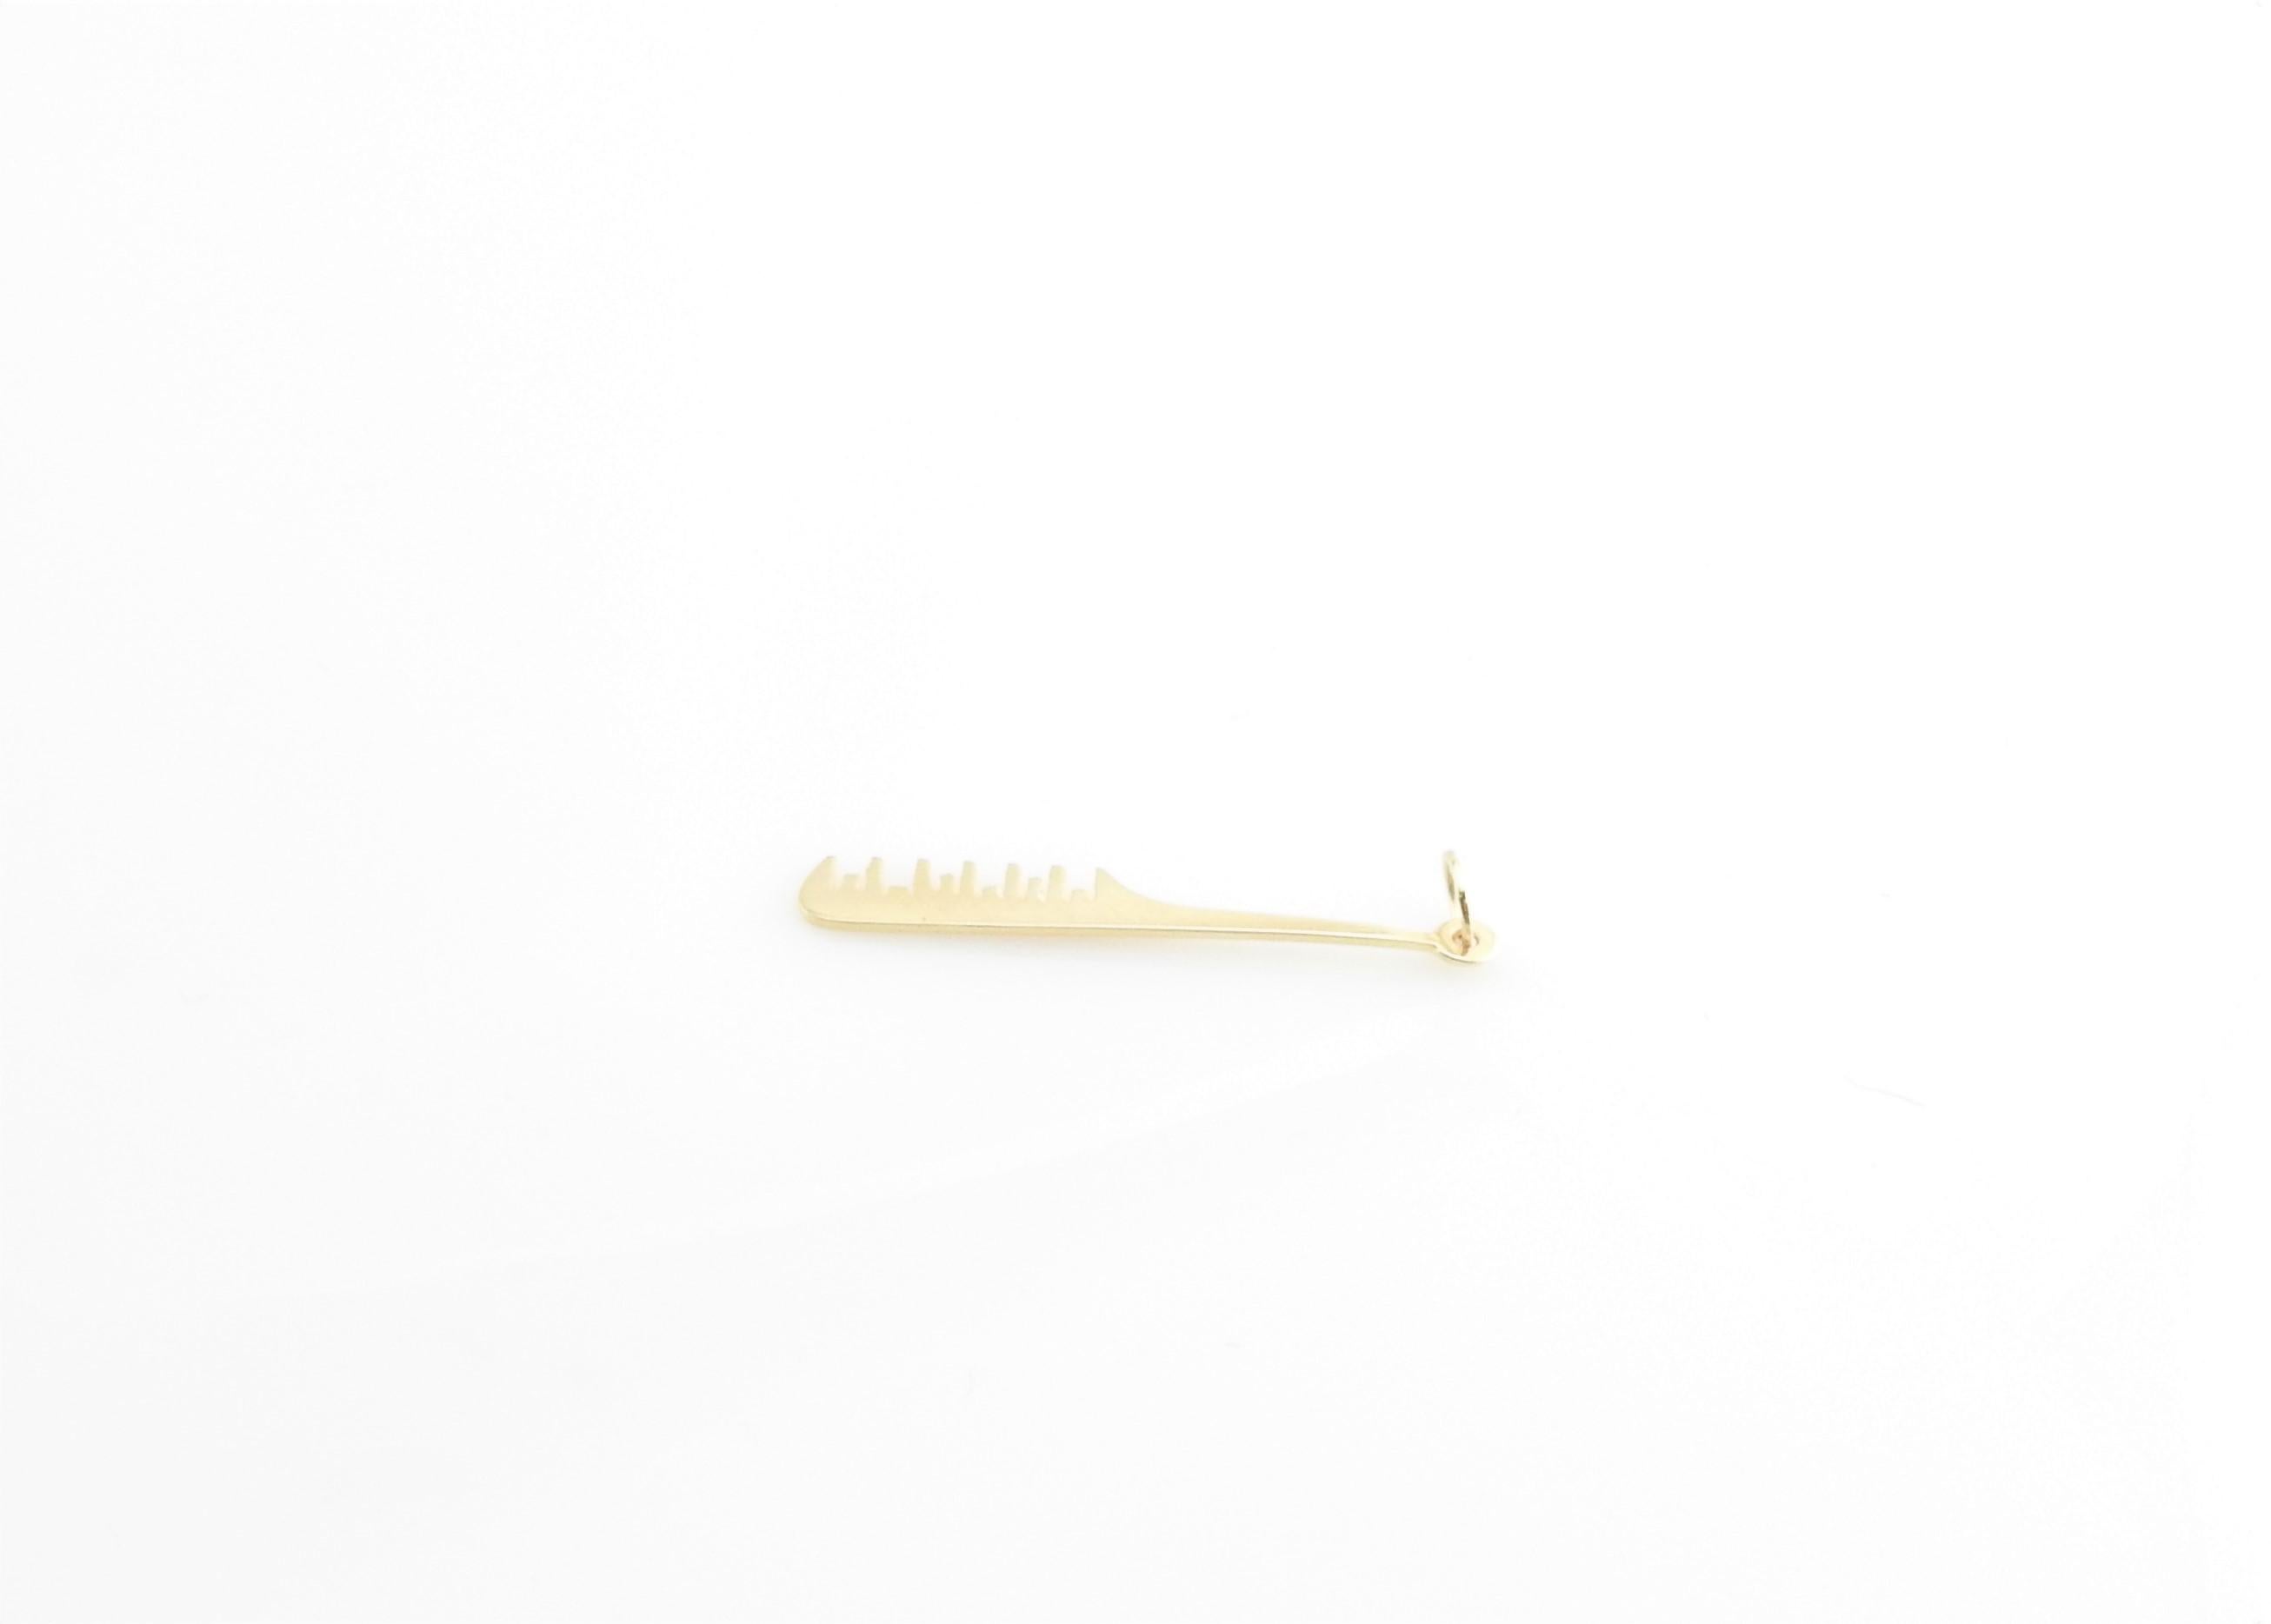 Vintage 14 Karat Yellow Gold Comb Charm

Perfect for the hair stylist in your life!

This lovely charm features a miniature comb meticulously detailed in 14K yellow gold.

Size: 36 mm x 5 mm (actual charm)

Weight: 0.5 dwt. / 0.8 gr.

Stamped: AC